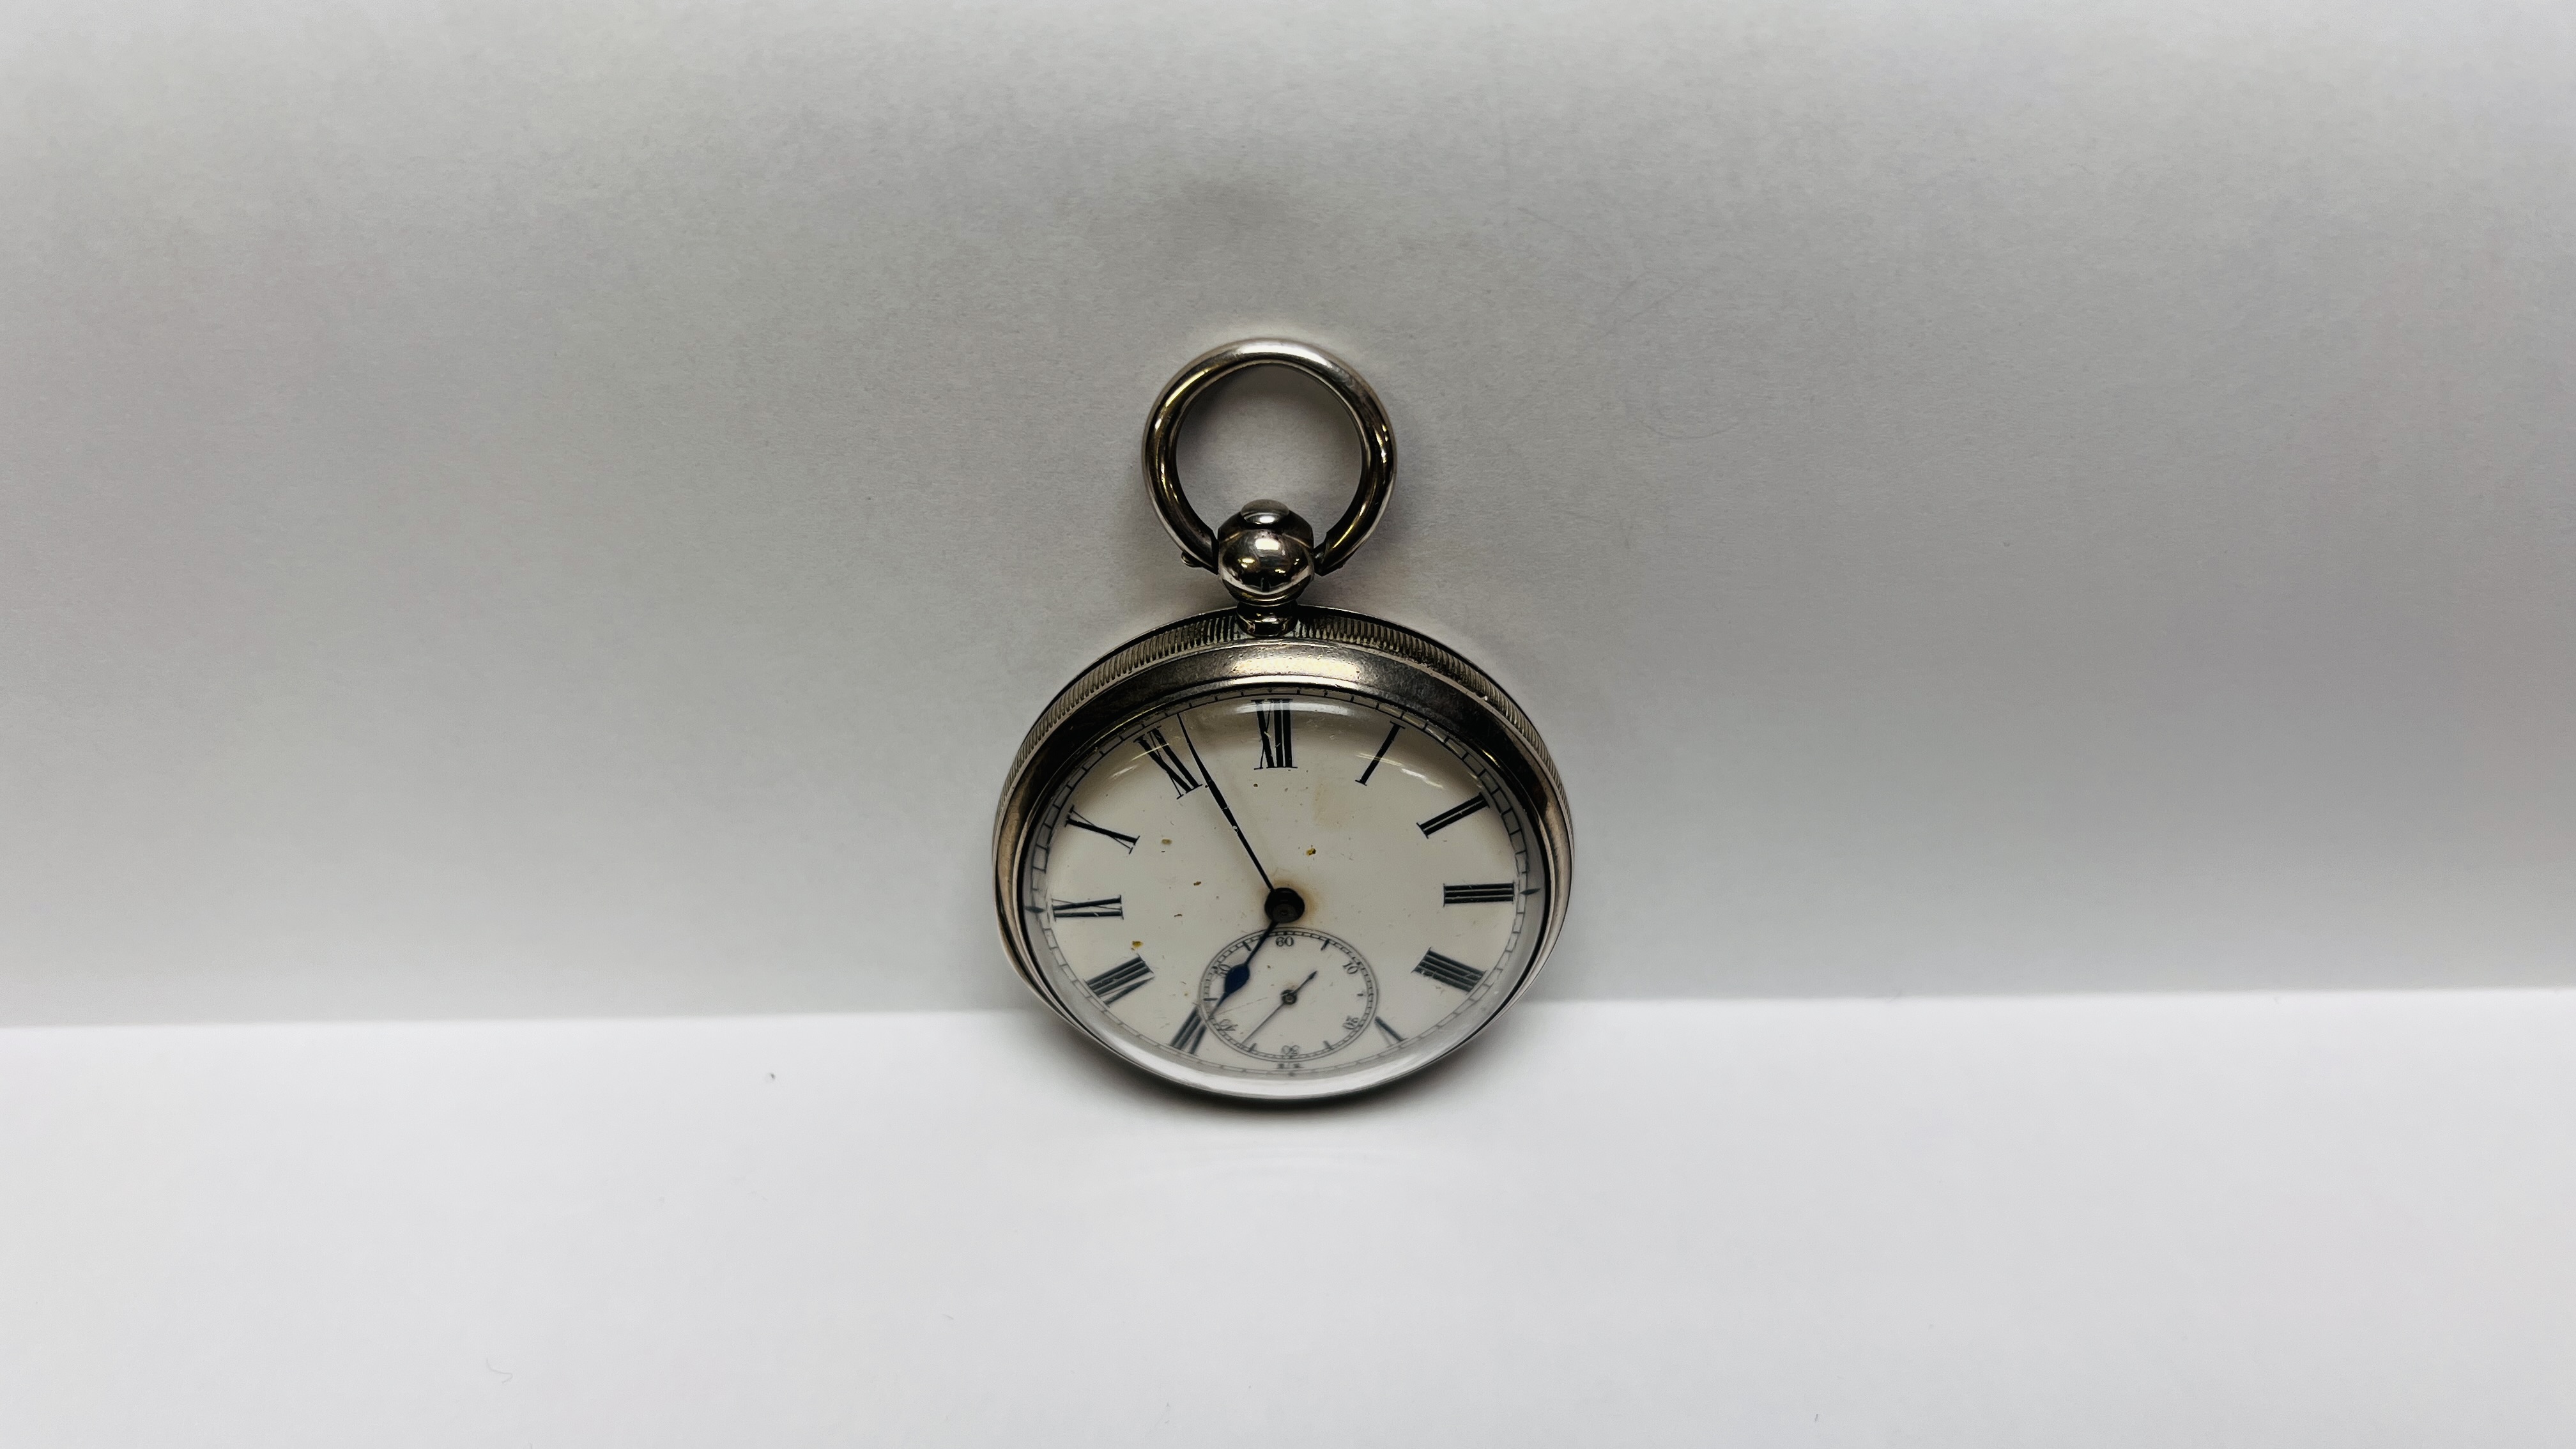 VINTAGE SILVER CASED POCKET WATCH MARKED 900 WITH ENAMELLED DIAL - Image 2 of 8